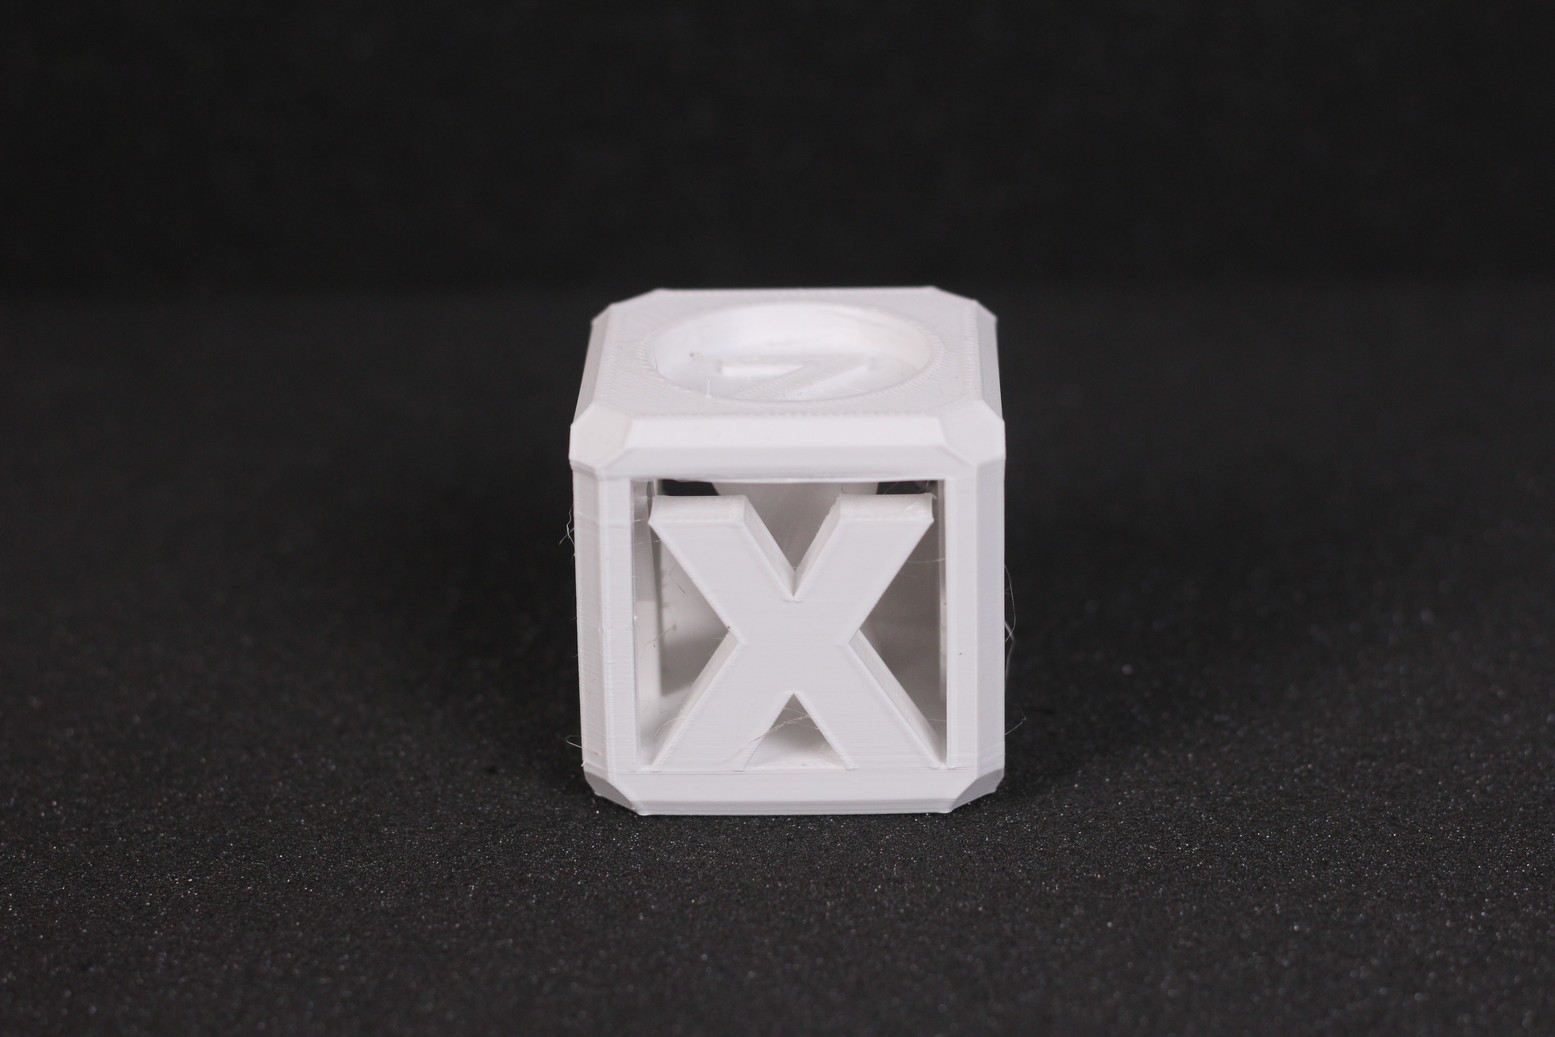 200 Helix Test Cube printed in PETG 4 | Creality Ender 2 Pro Review: Is it worth it?